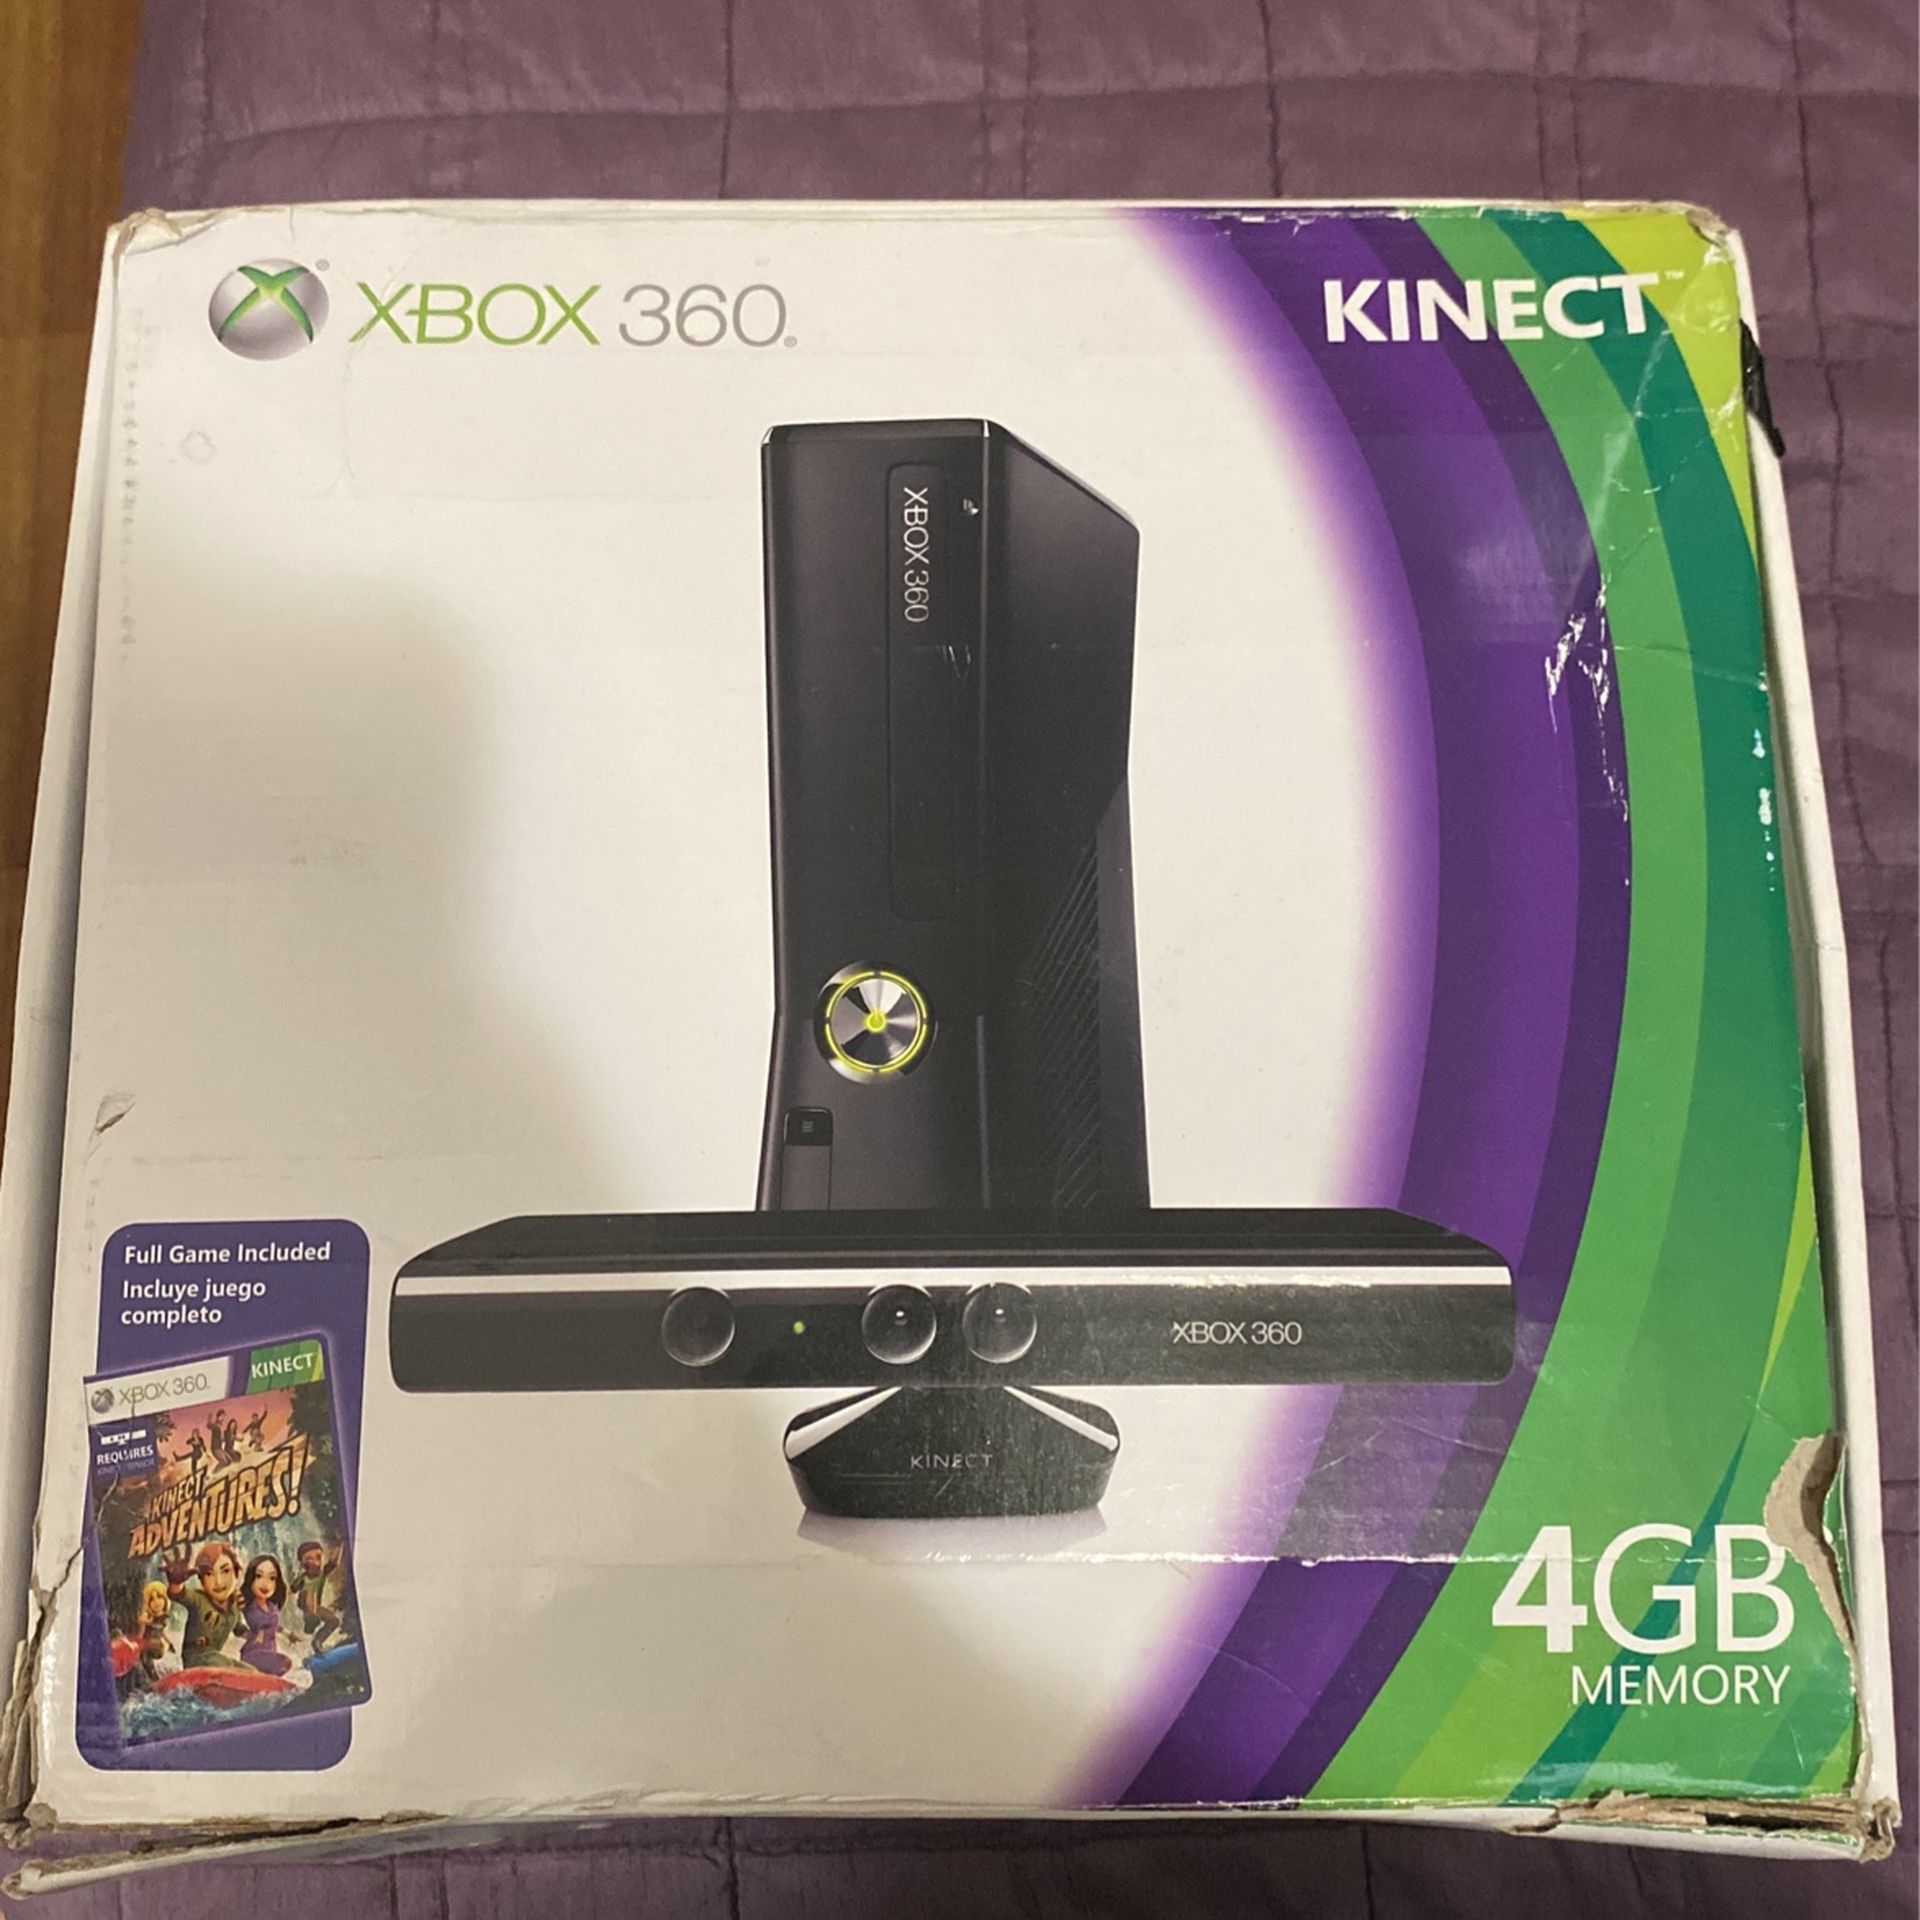 Xbox 360 Kinect 4GB Memory Without The Controller 